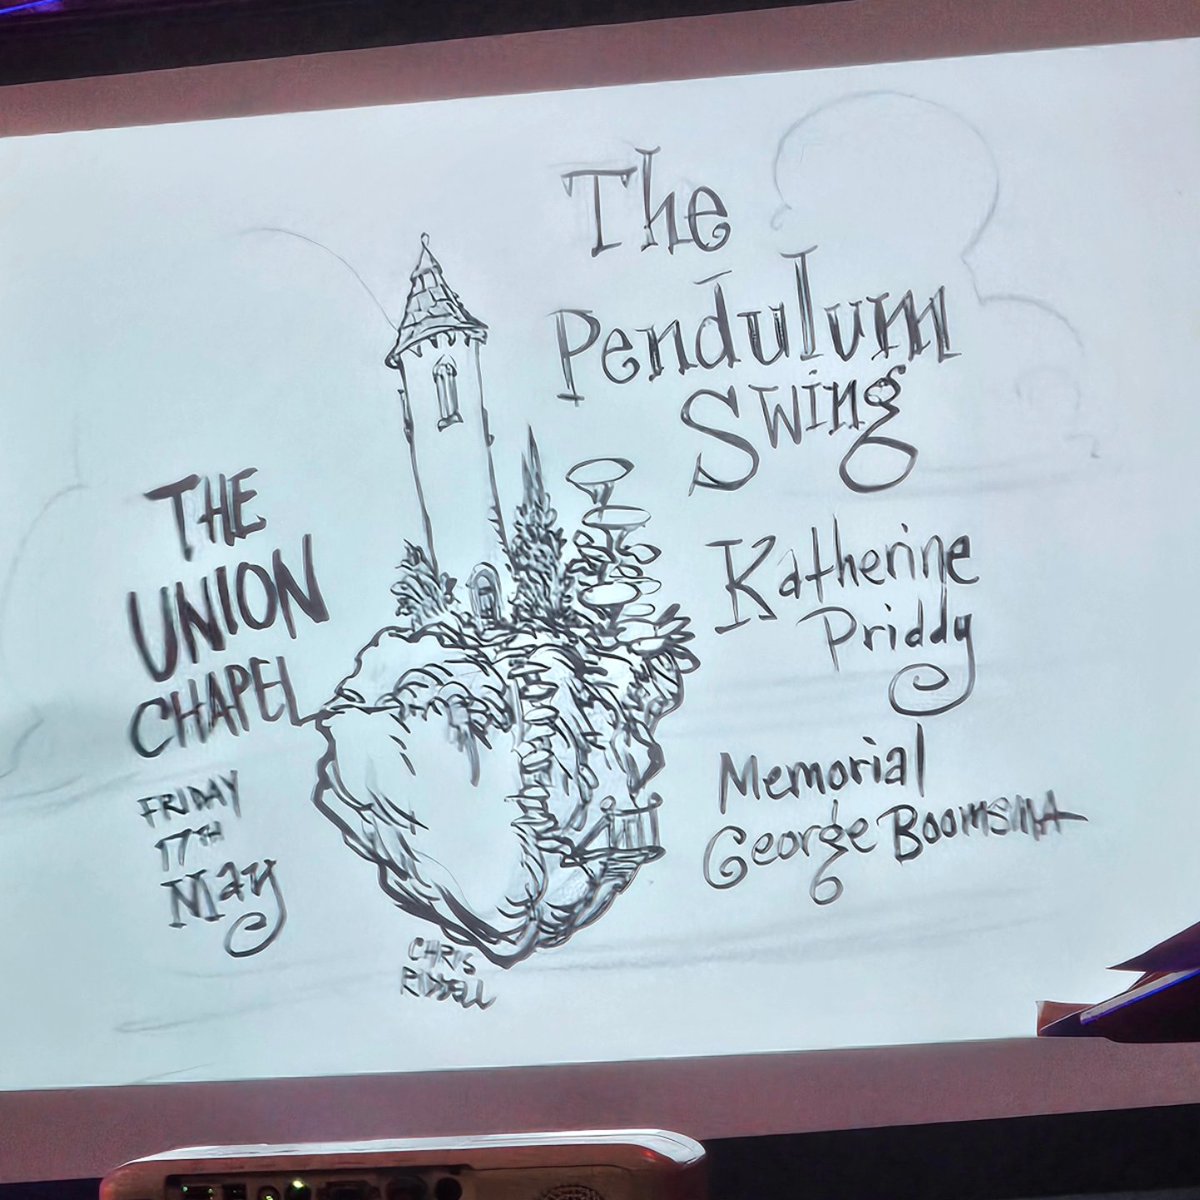 Spent evening with @KatherinePriddy, what an evening! Glorious gig @UnionChapelUK, with support from @GeorgeBoomsma & Memorial, with beautiful drawings from @chrisriddell50. Is there anything more special that hugely talented artists performing live music in beautiful setting.